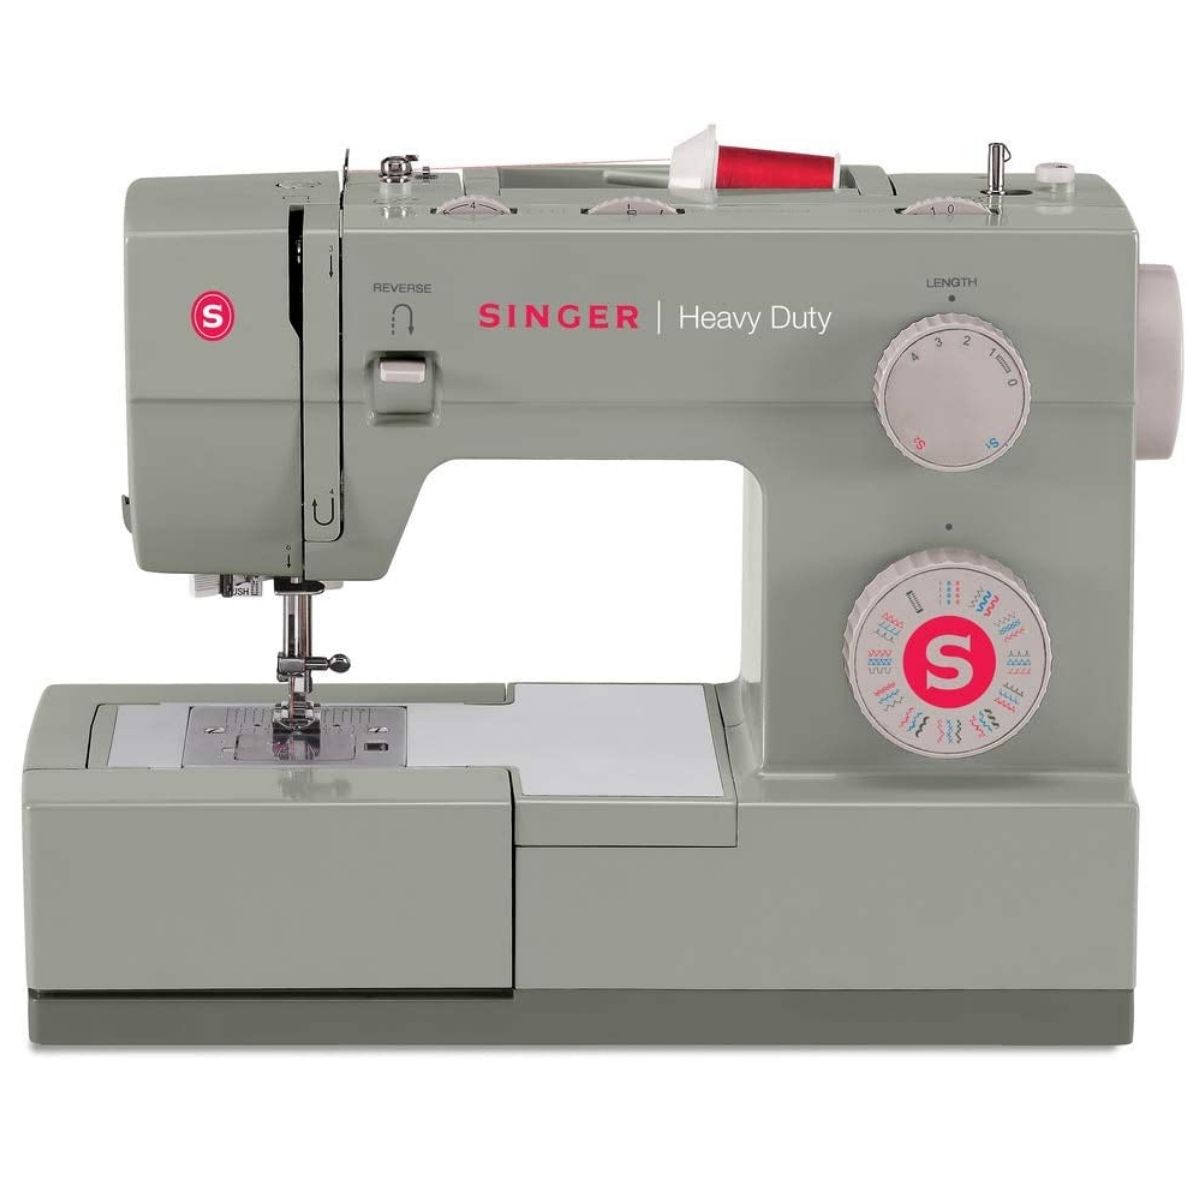 a gray singer sewing machine with large round knobs on the front with bright red letting 